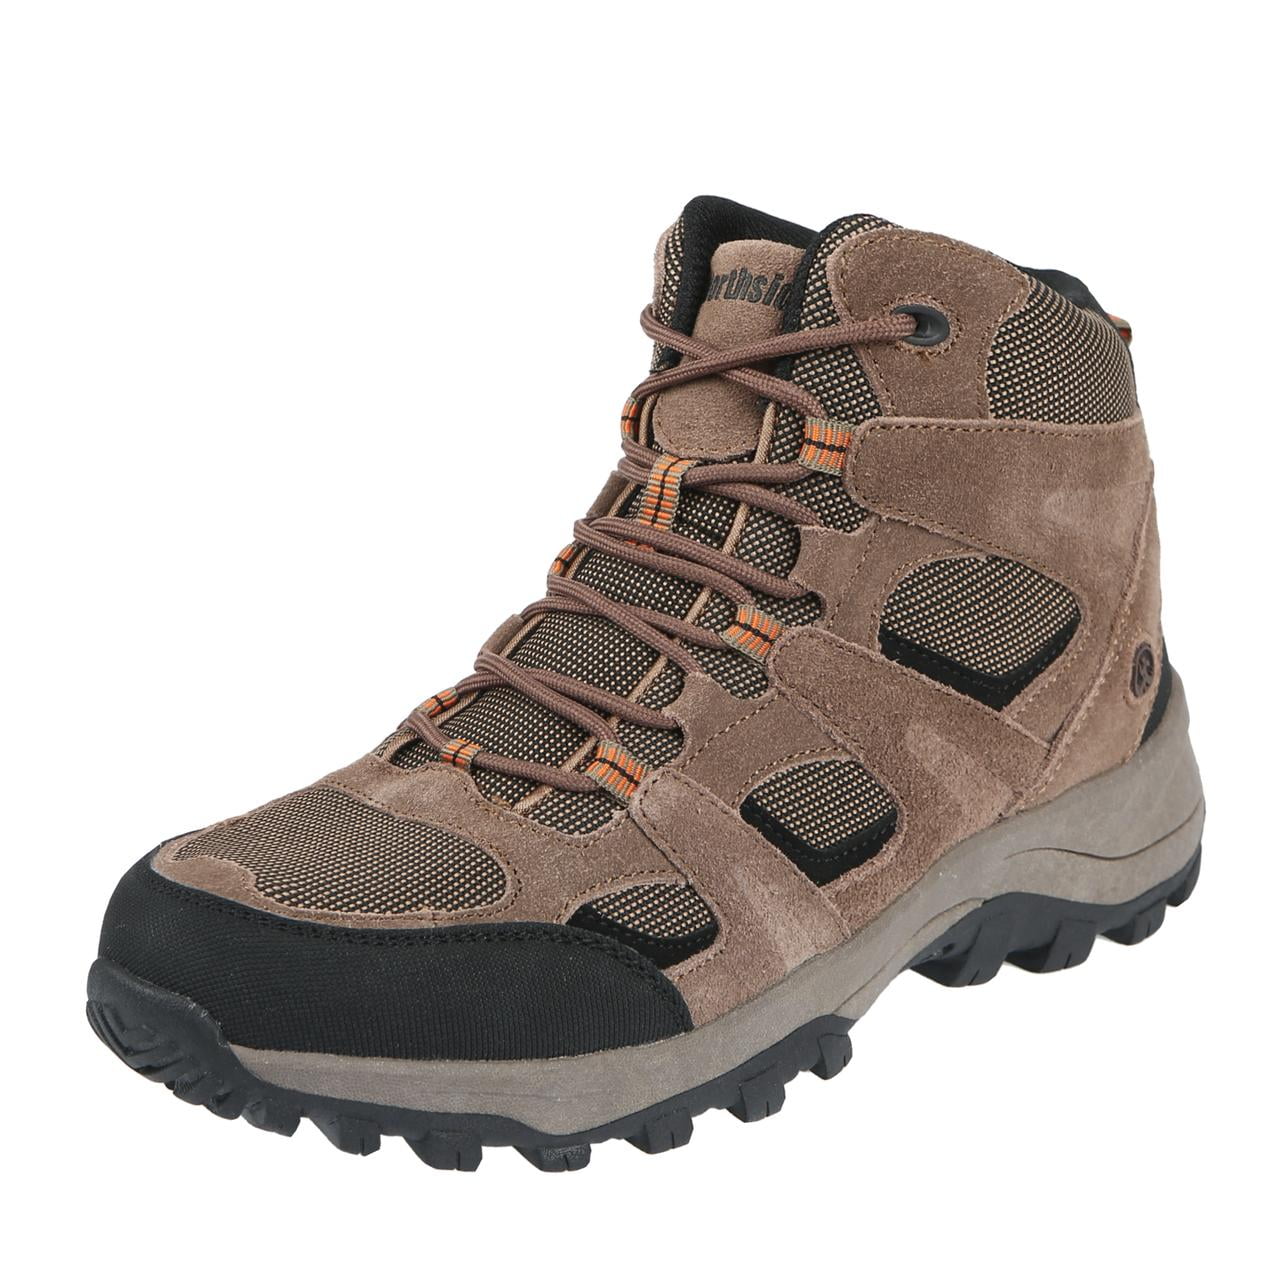 Northside Mens Snohomish Leather Waterproof Mid Hiking Boot 